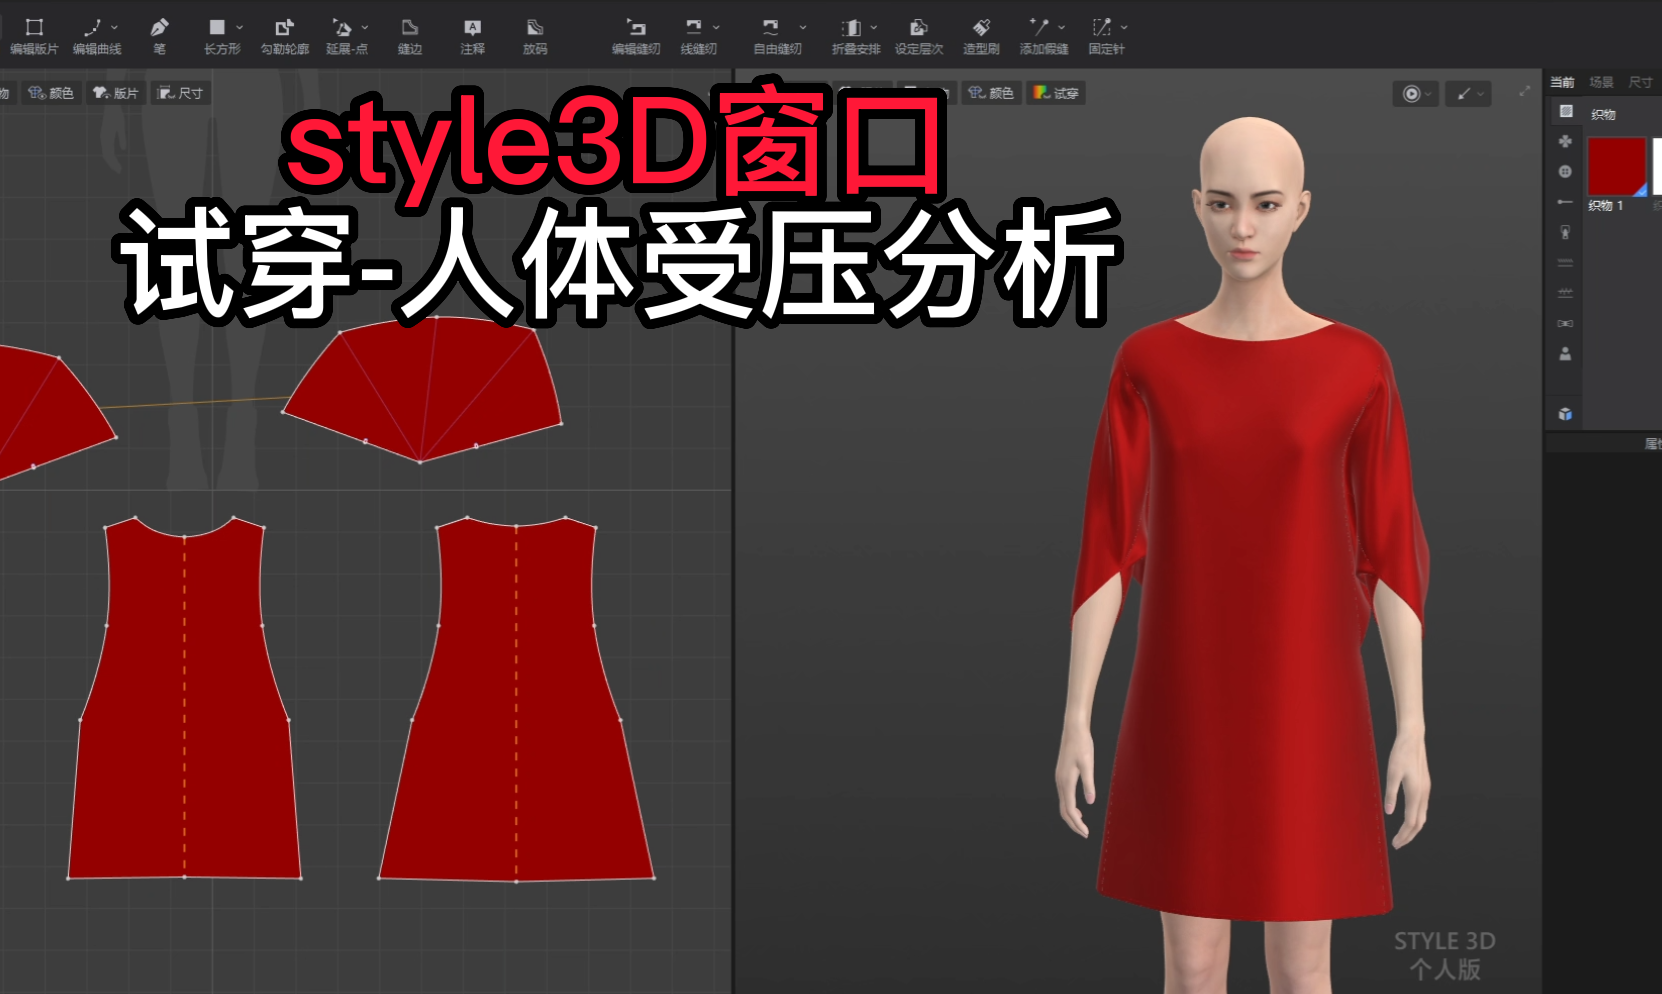 54style3D窗口-试穿-人体受压分析.png